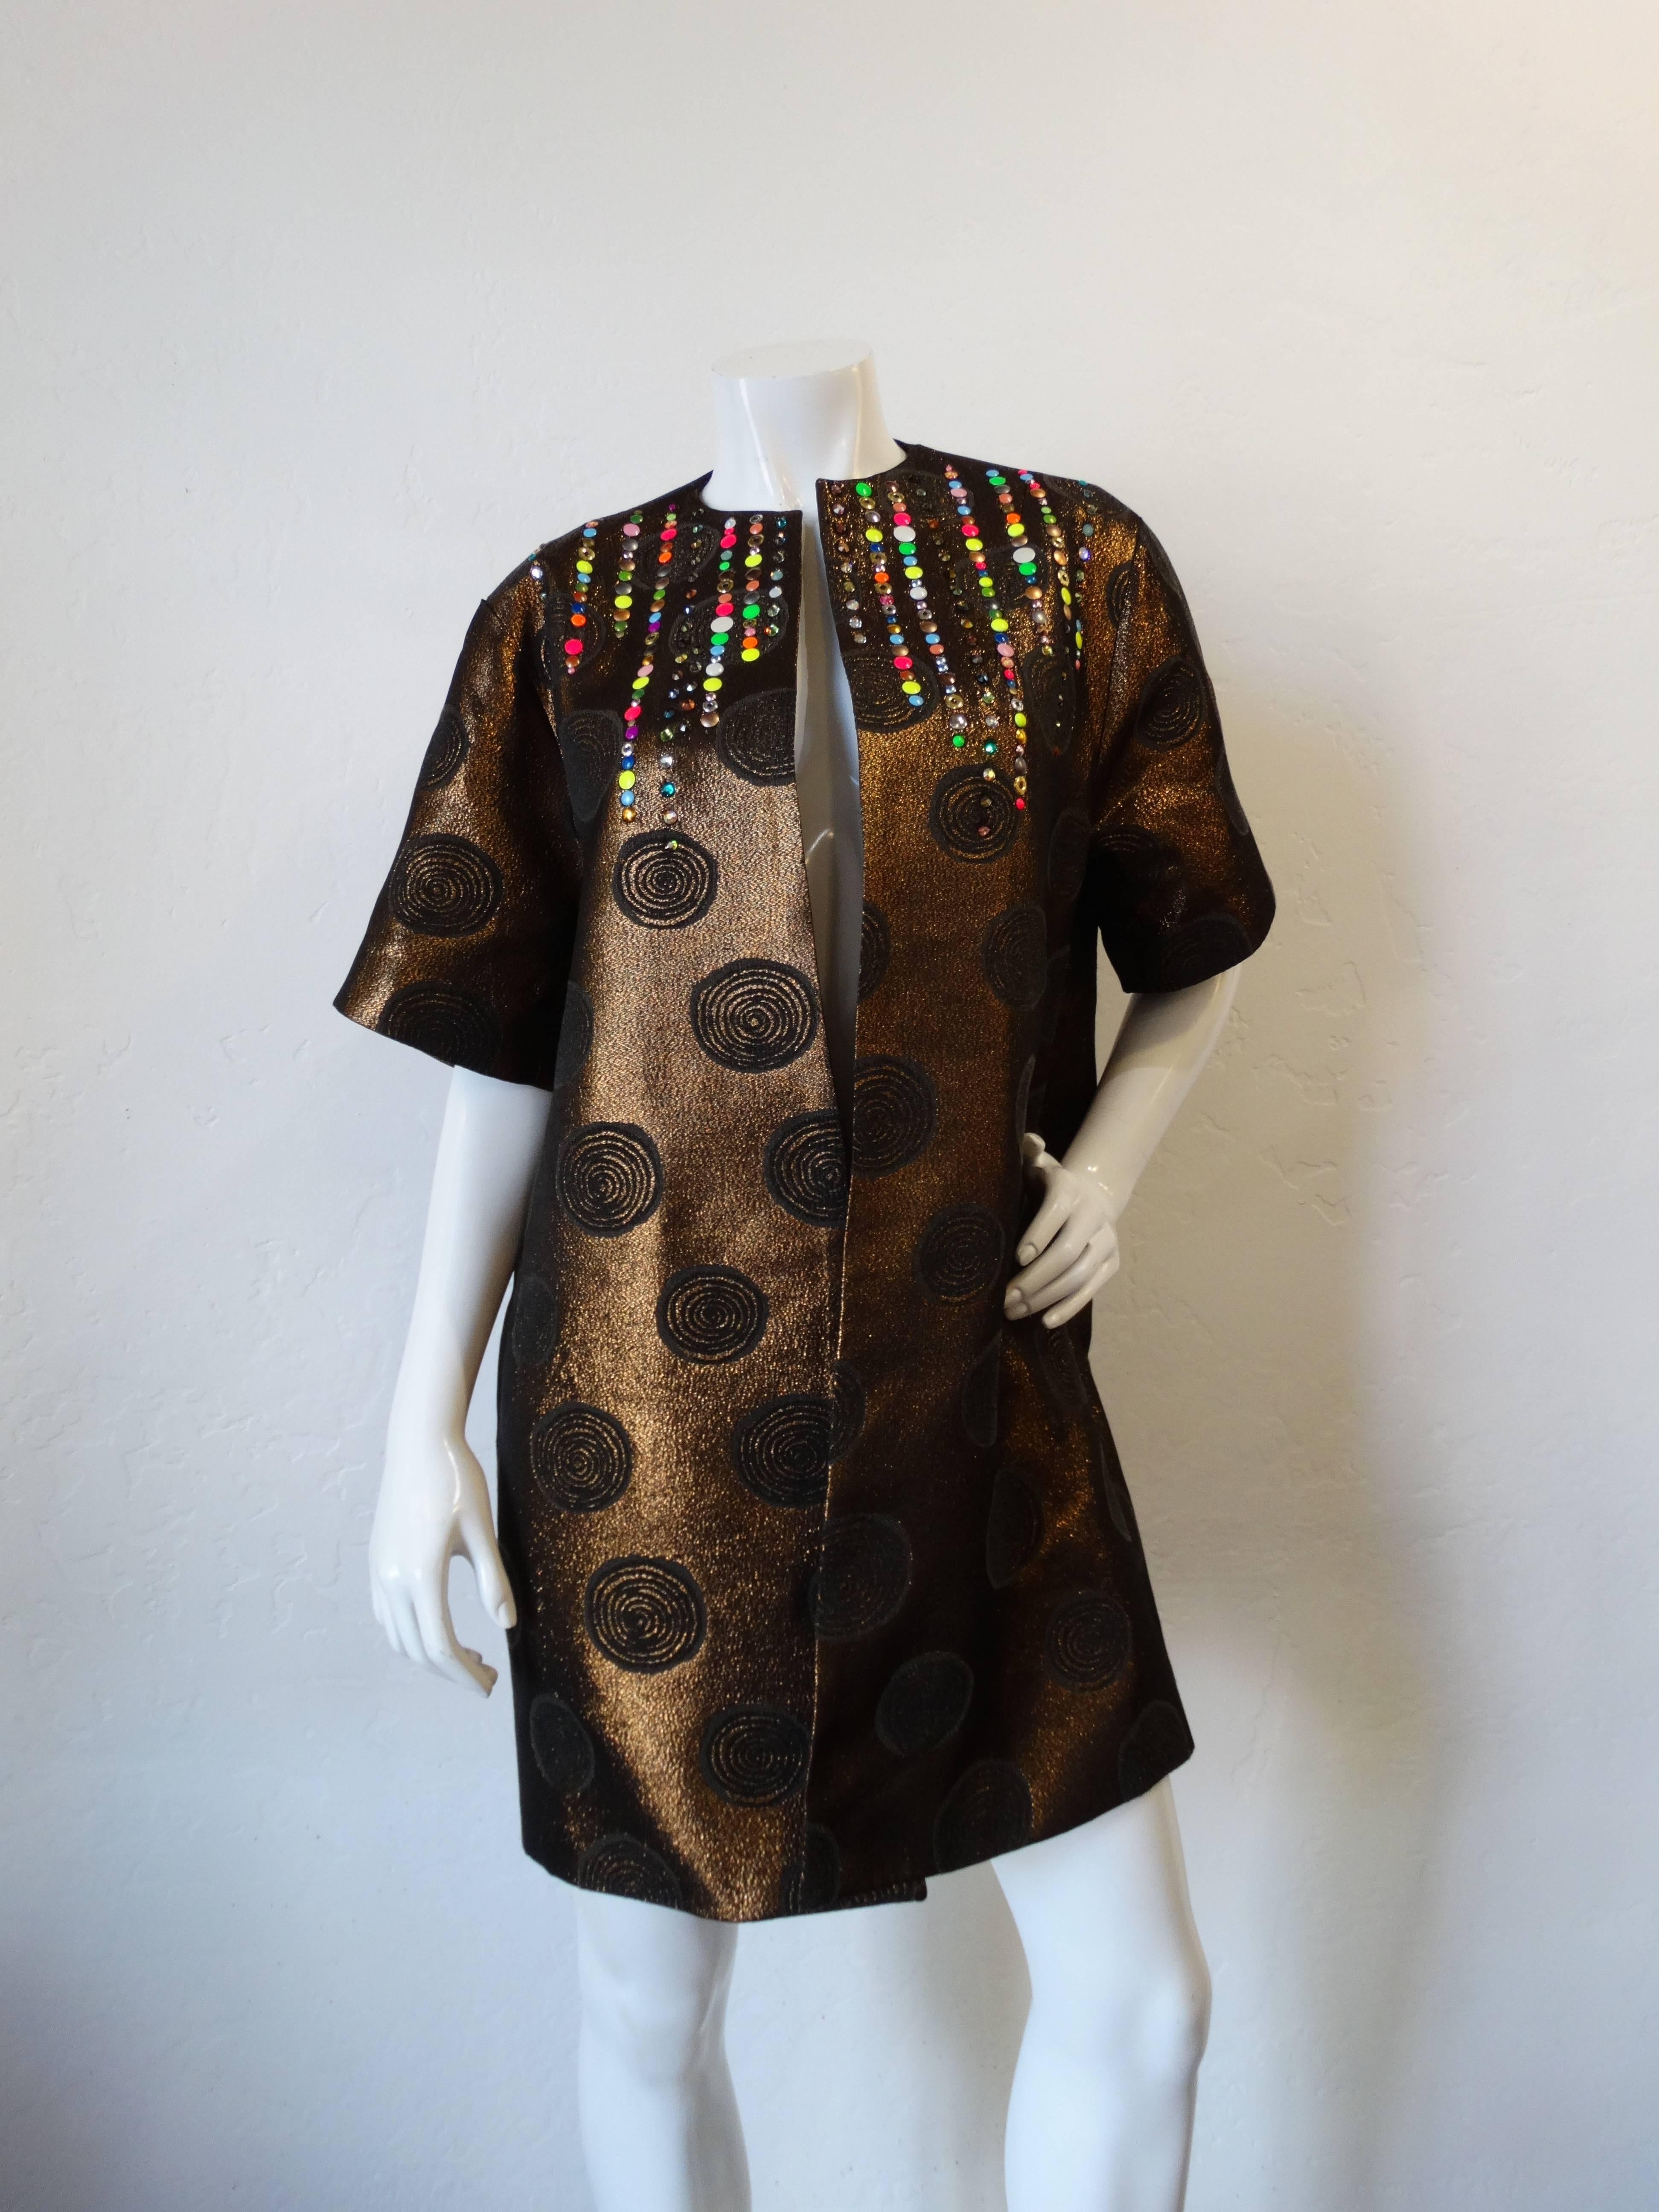 Incredible piece from the well-sought after brand Libertine! Metallic woven fabric embroidered with swirly dots and accented with rainbow studs around the collar. Short sleeves with a swing-coat like fit. Pockets at either side. Black satin lined